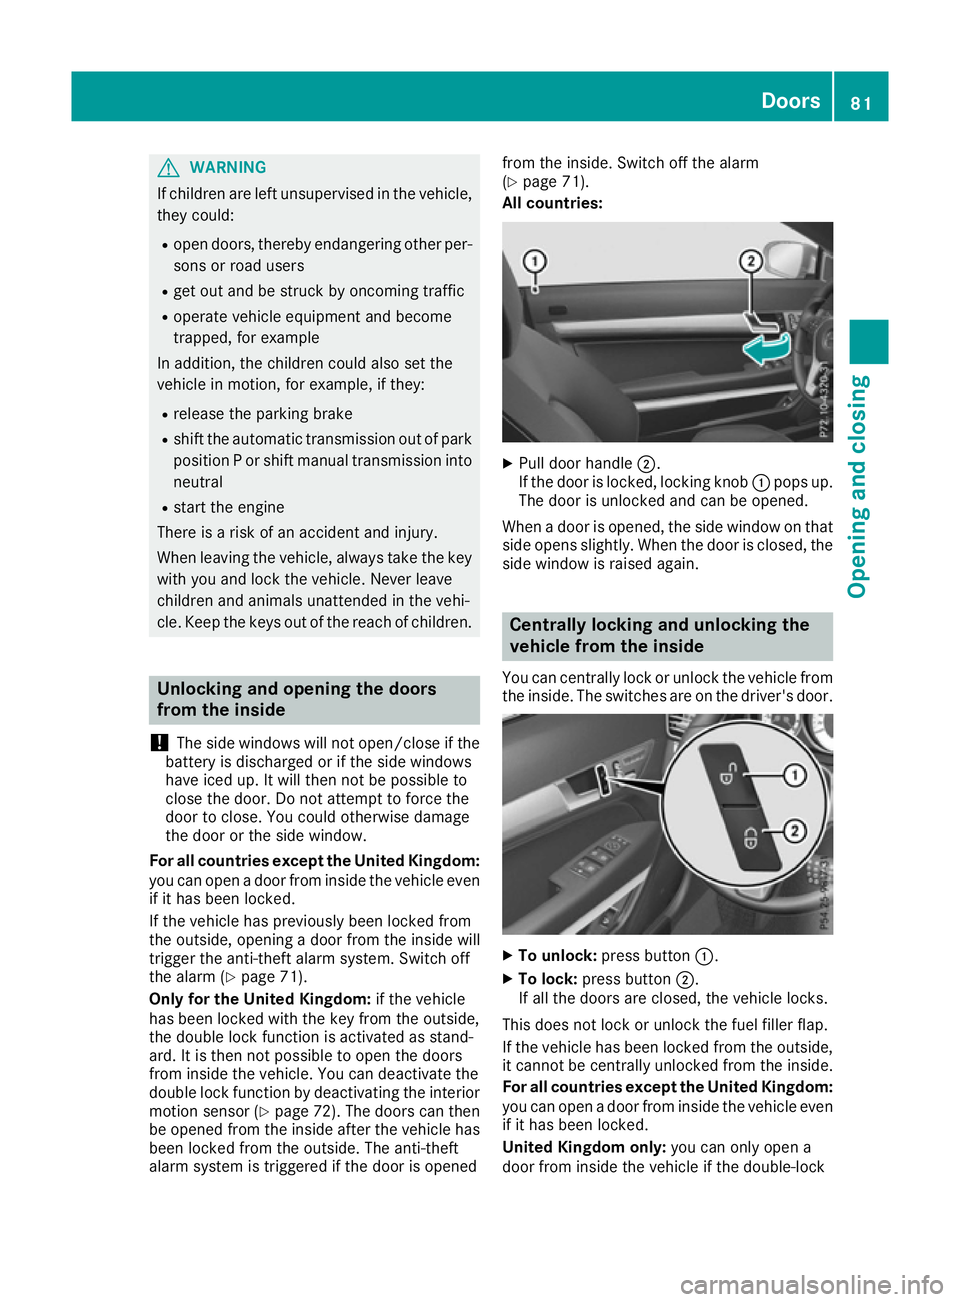 MERCEDES-BENZ E-CLASS CABRIOLET 2015  Owners Manual G
WARNING
If children are left unsupervised in the vehicle, they could:
R open doors, thereby endangering other per-
sons or road users
R get out and be struck by oncoming traffic
R operate vehicle eq